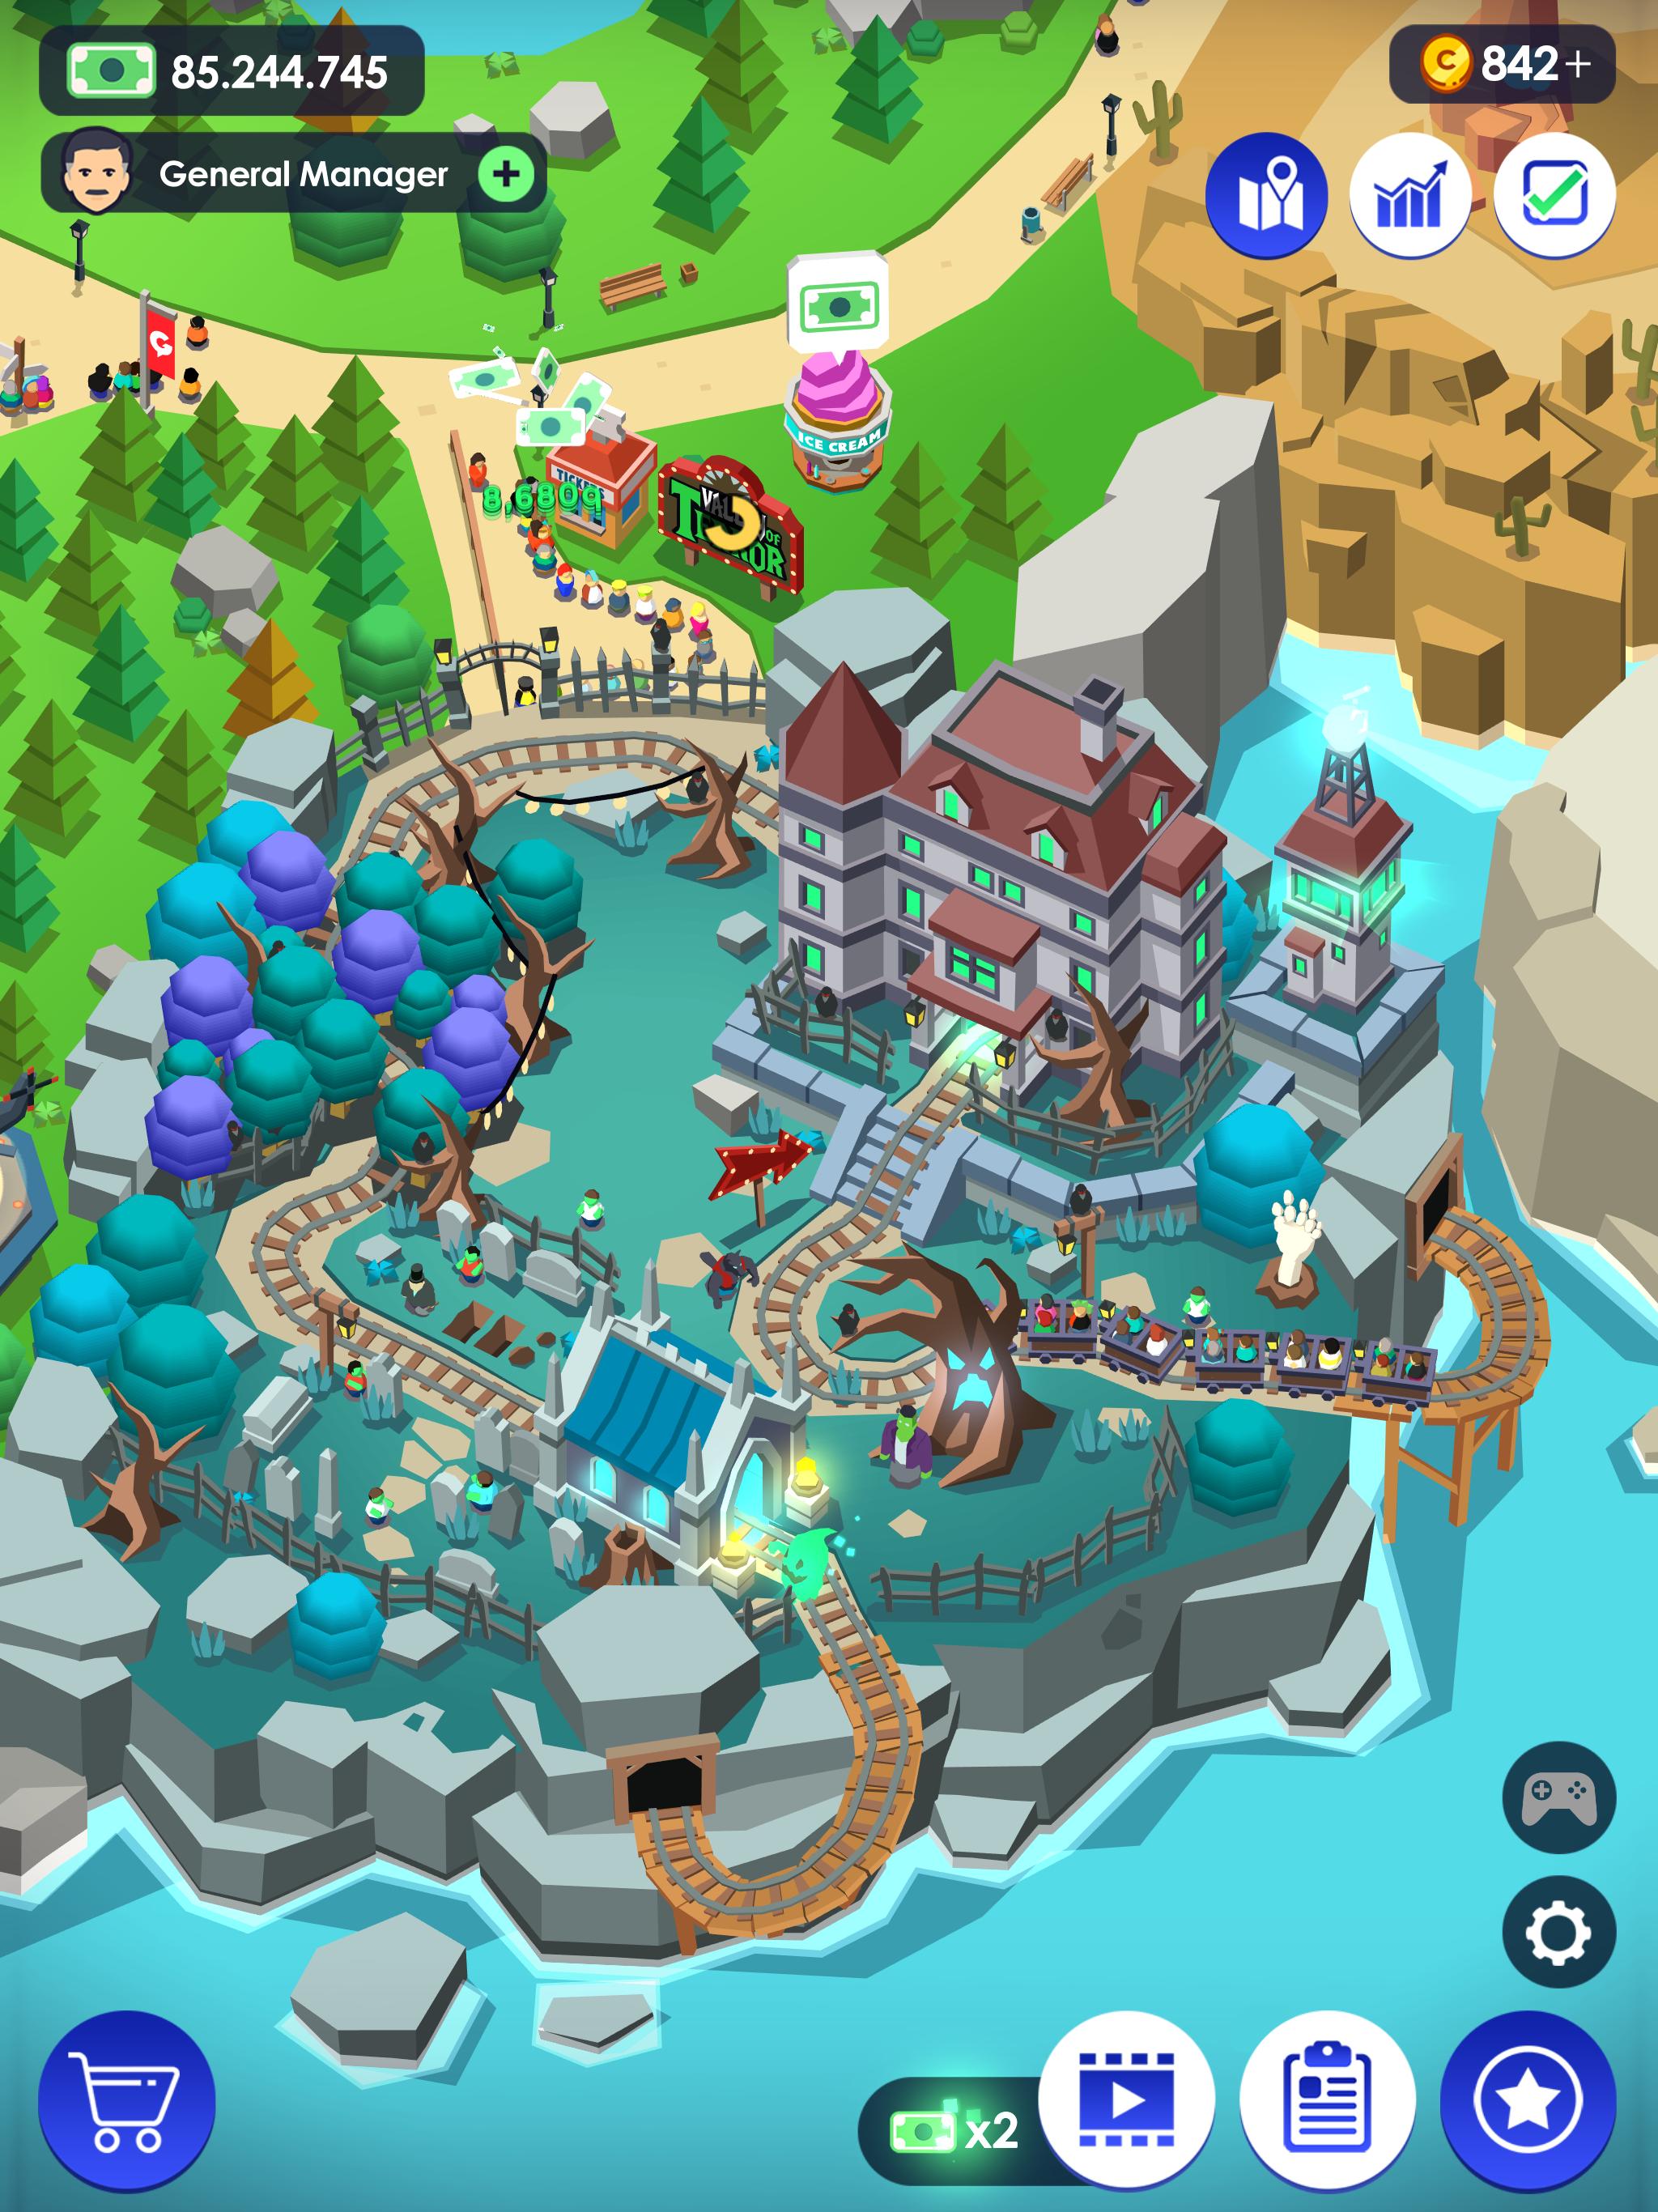 Idle game mod. Игра Theme Park Tycoon. Парк в игре Theme Park Tycoon. Игра Theme Park Tycoon 2. Idle Theme Park Tycoon Recreation game.